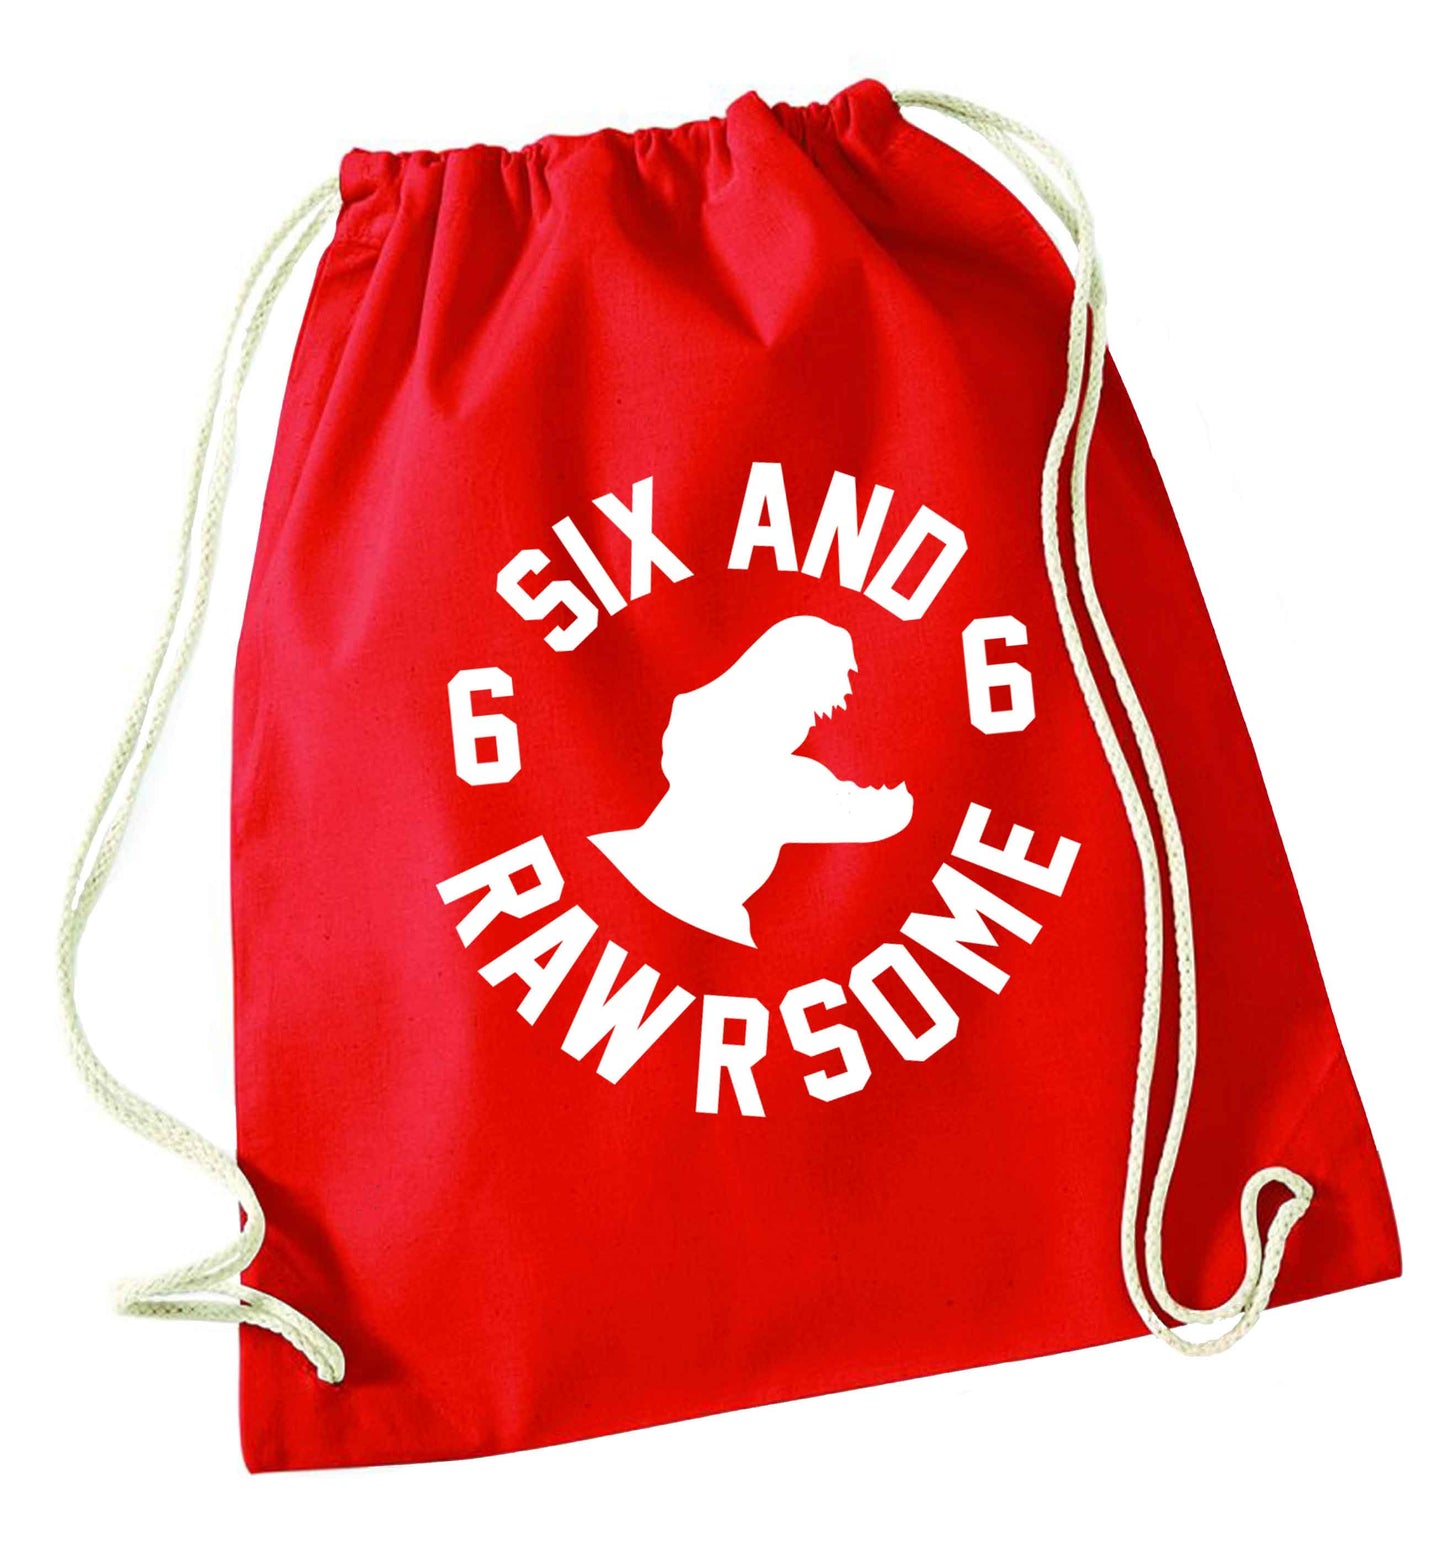 Six and rawrsome red drawstring bag 